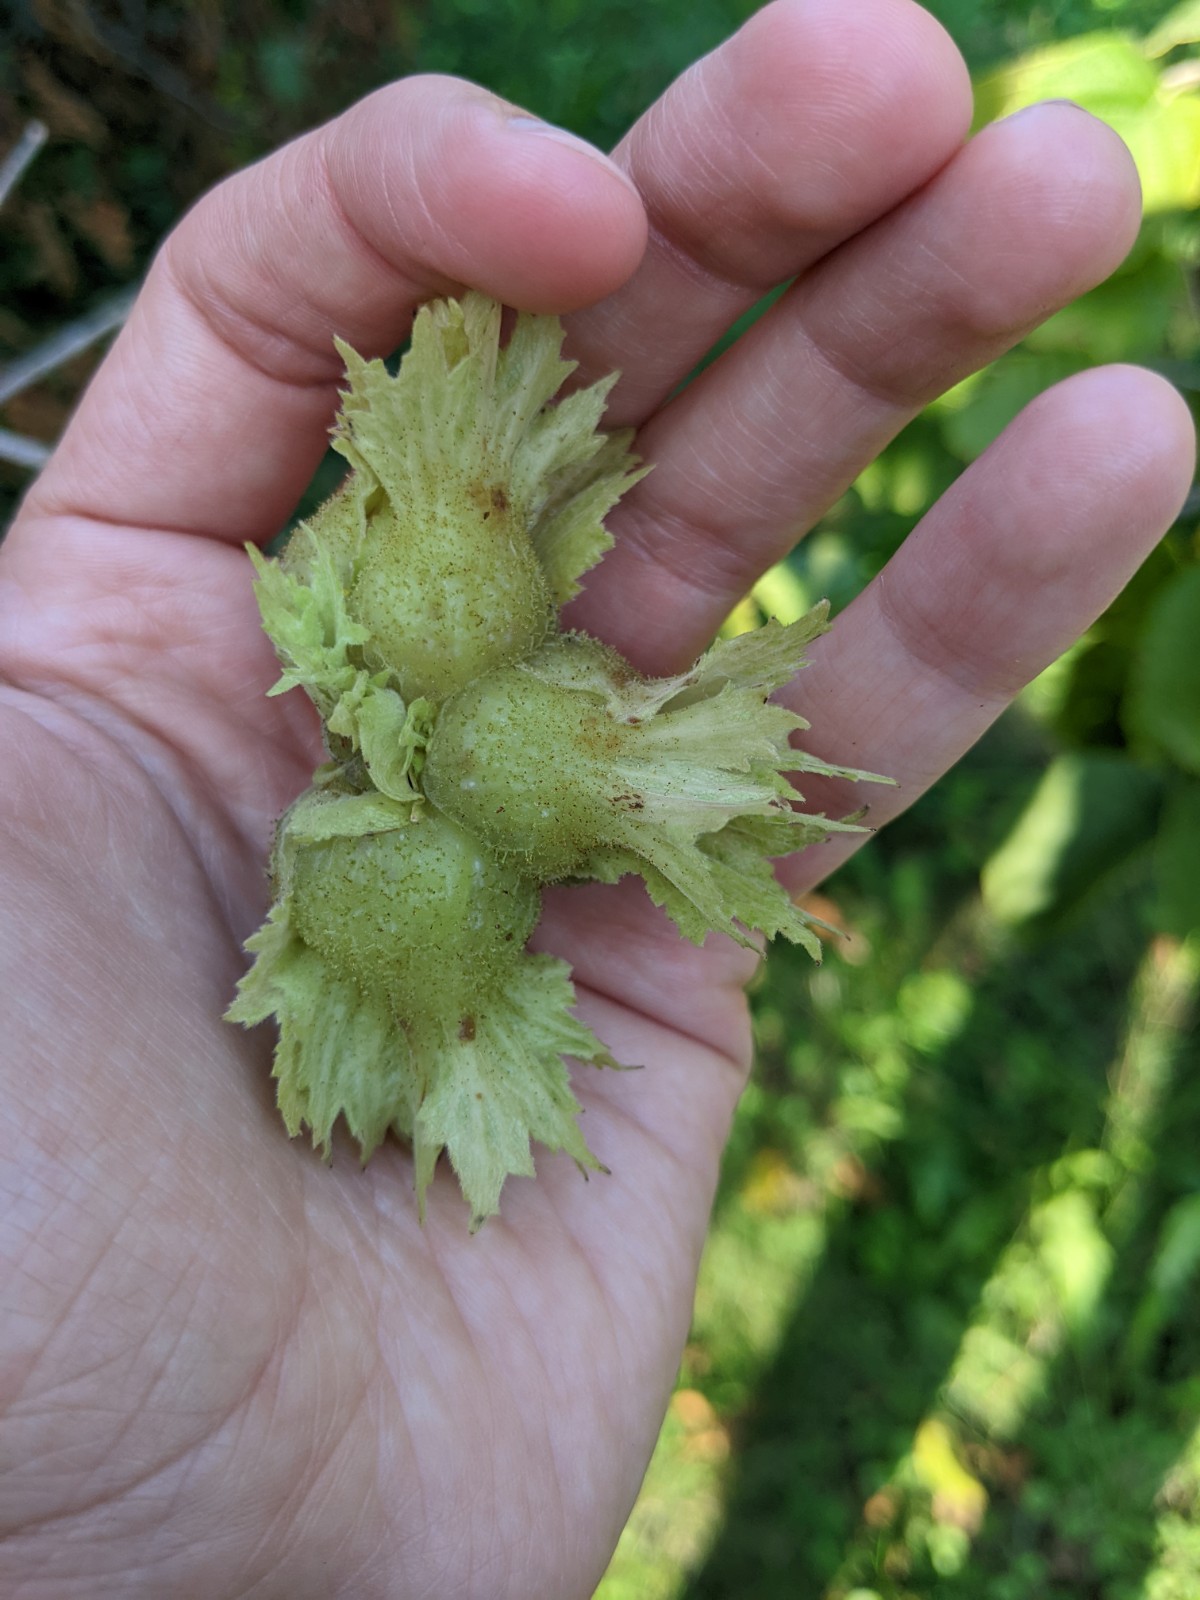 A hand holding a cluster of hazelnuts.